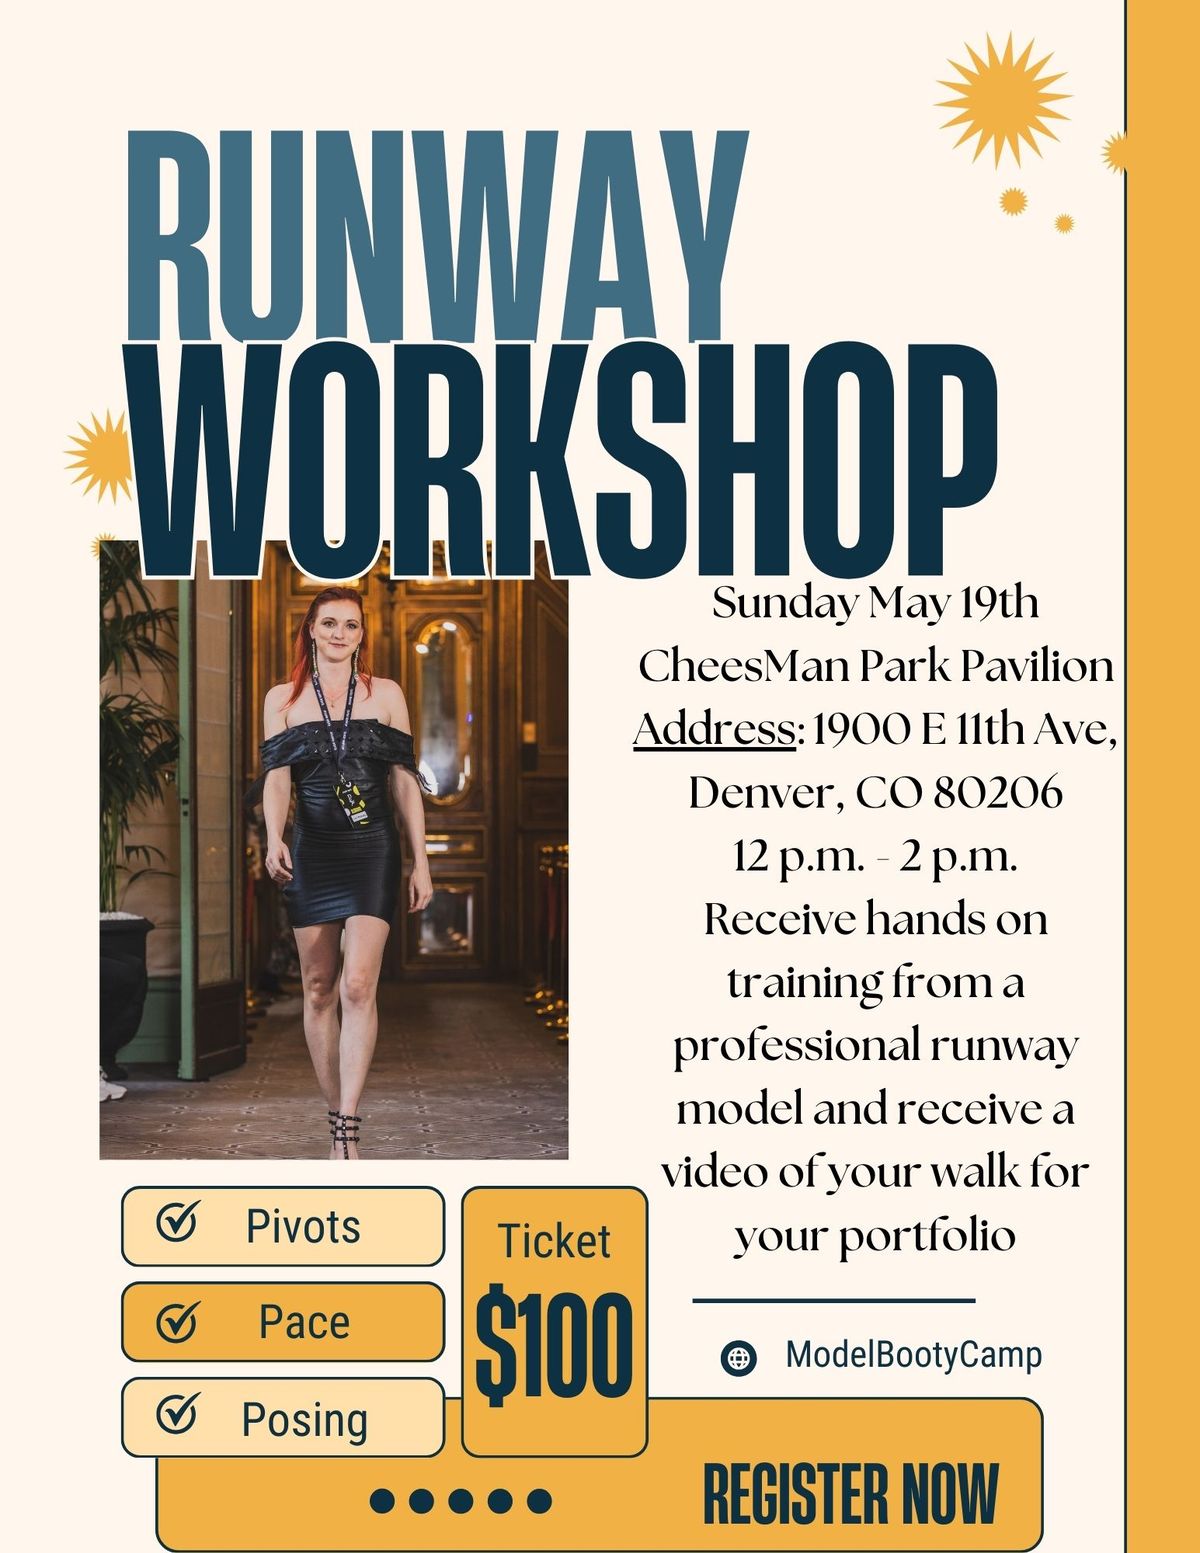 Runway Workshop for models, photographers, and Makeup Artists